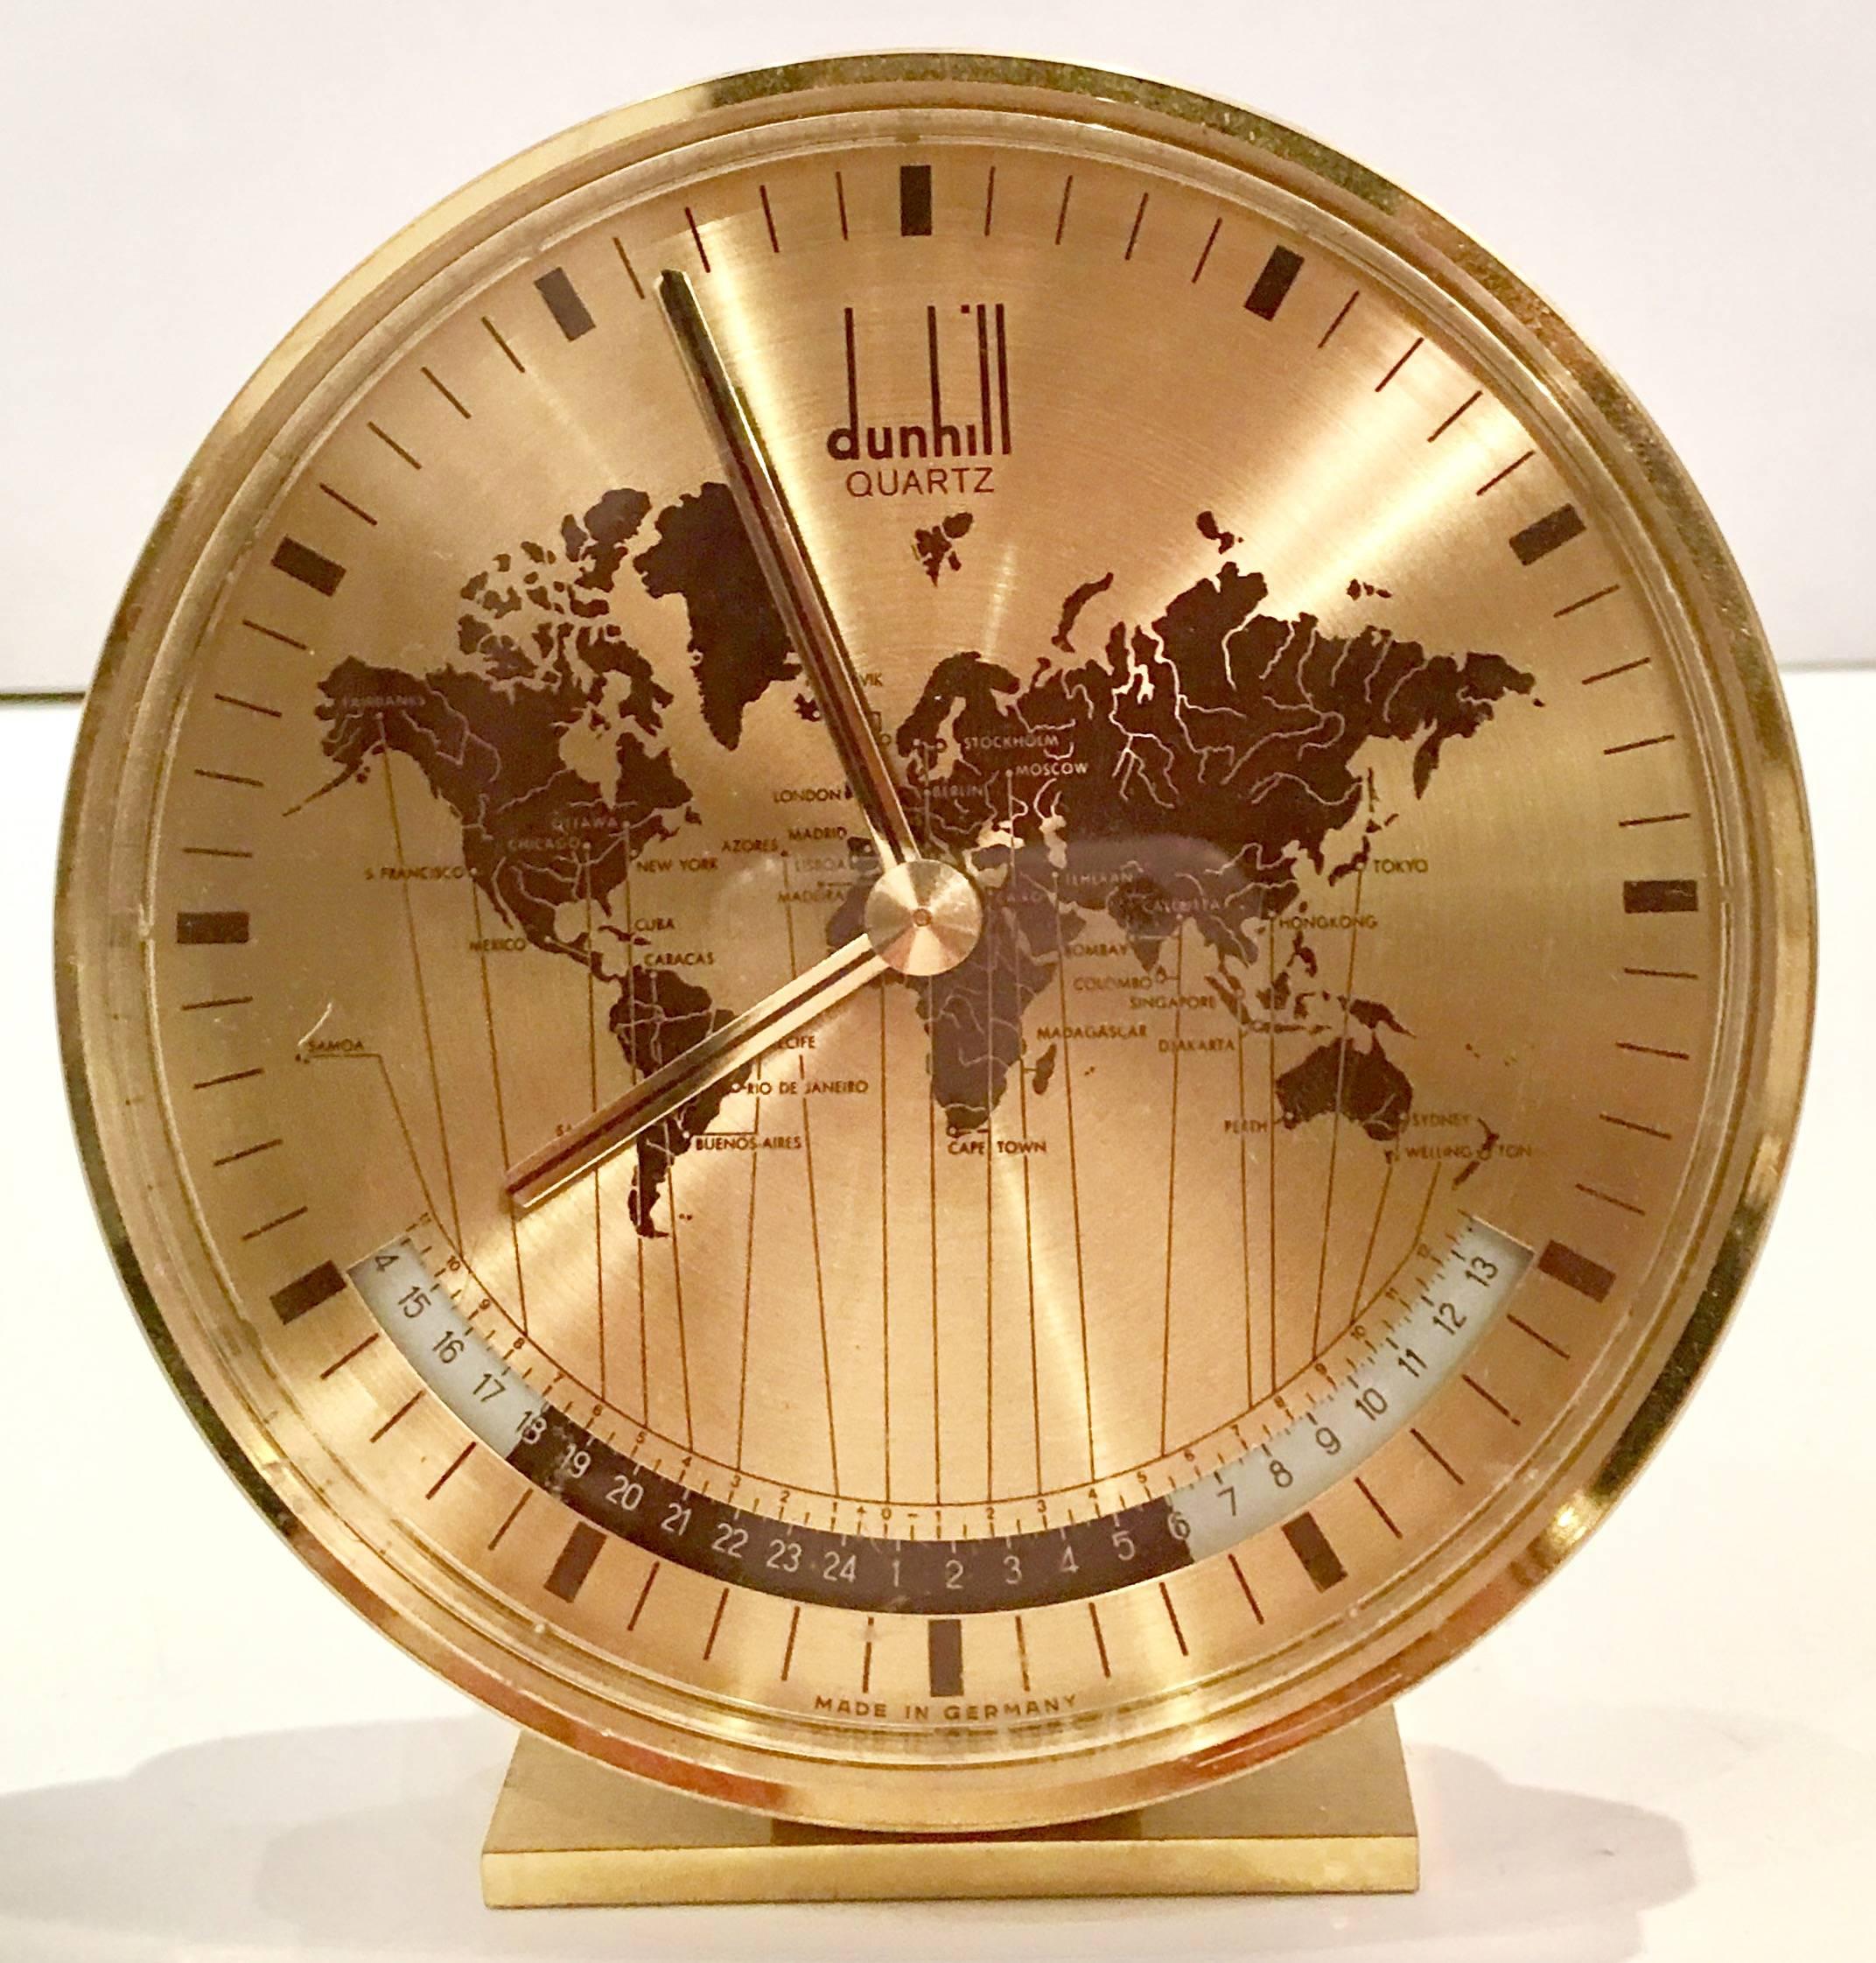 Alfred Dunhill world quartz desk clock by Kienzle, Germany. Features gold brass frame and stand, Lucite shadow box style front cover and gold and brown face and dial. Dunhill logo on front as well as made in Germany lower front center. The back is